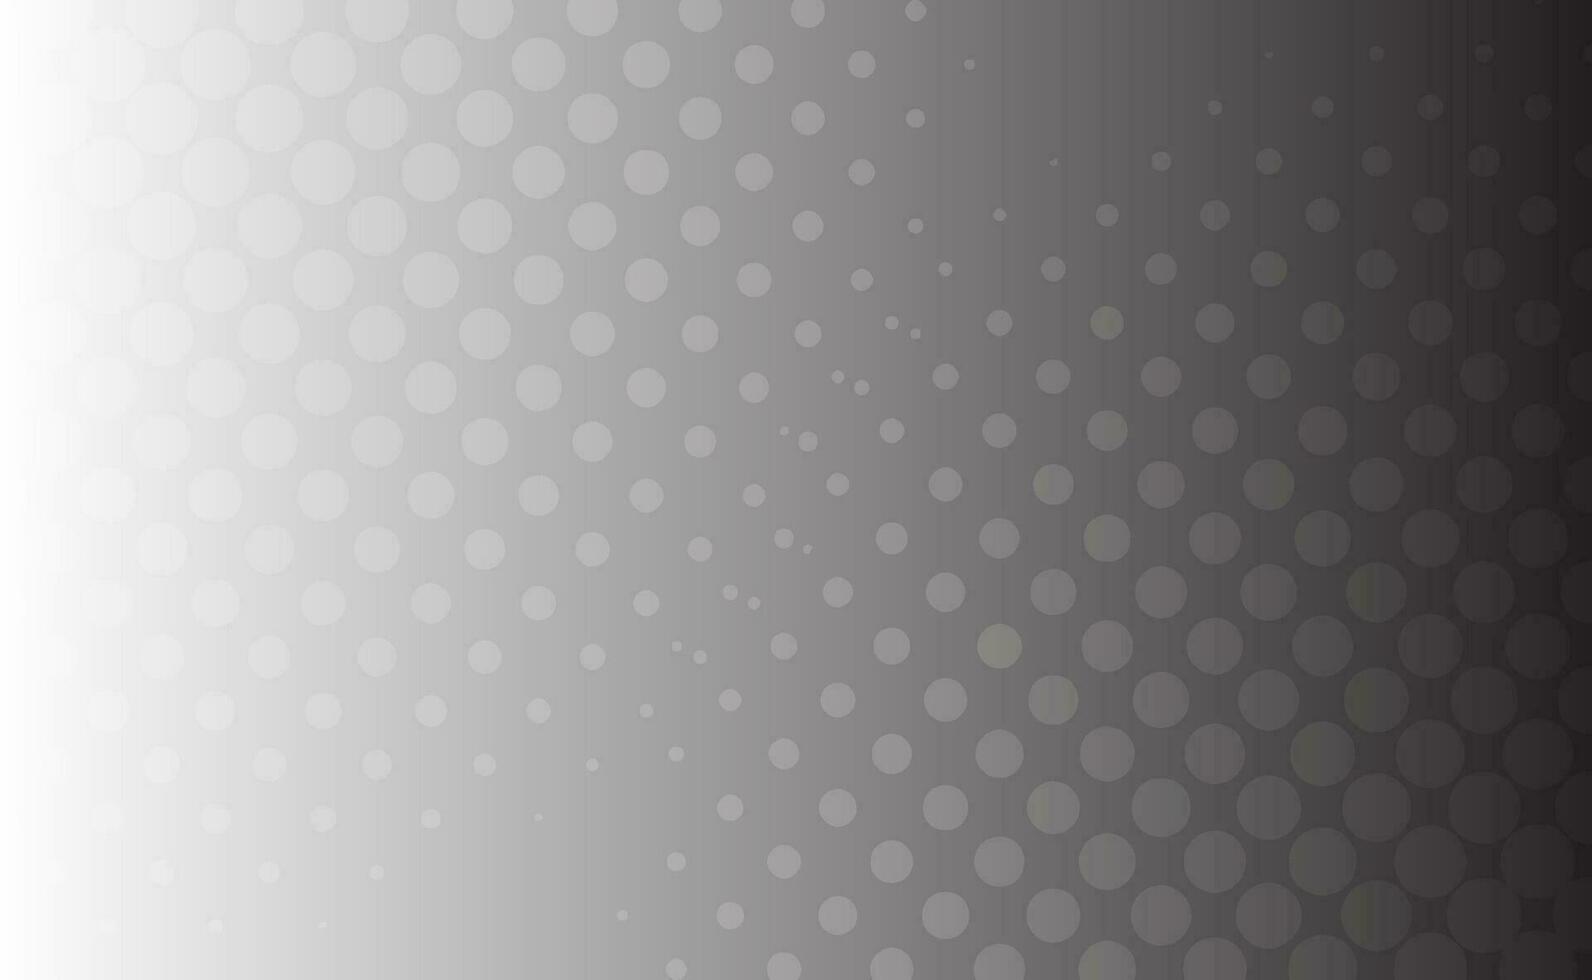 black and white abstract background free vector design